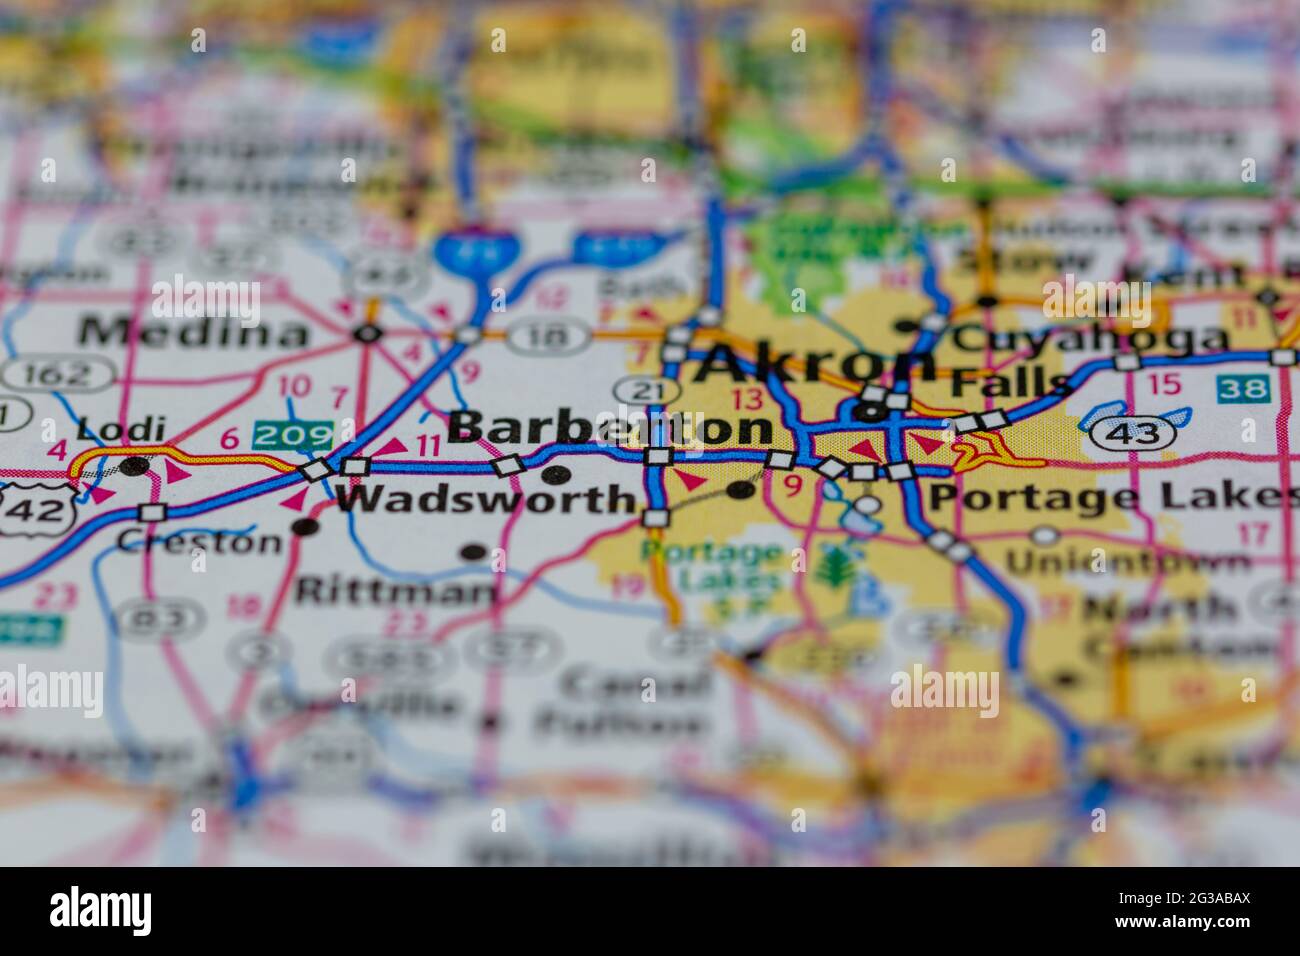 Barberton Ohio Usa Shown On A Geography Map Or Road Map 2G3ABAX 